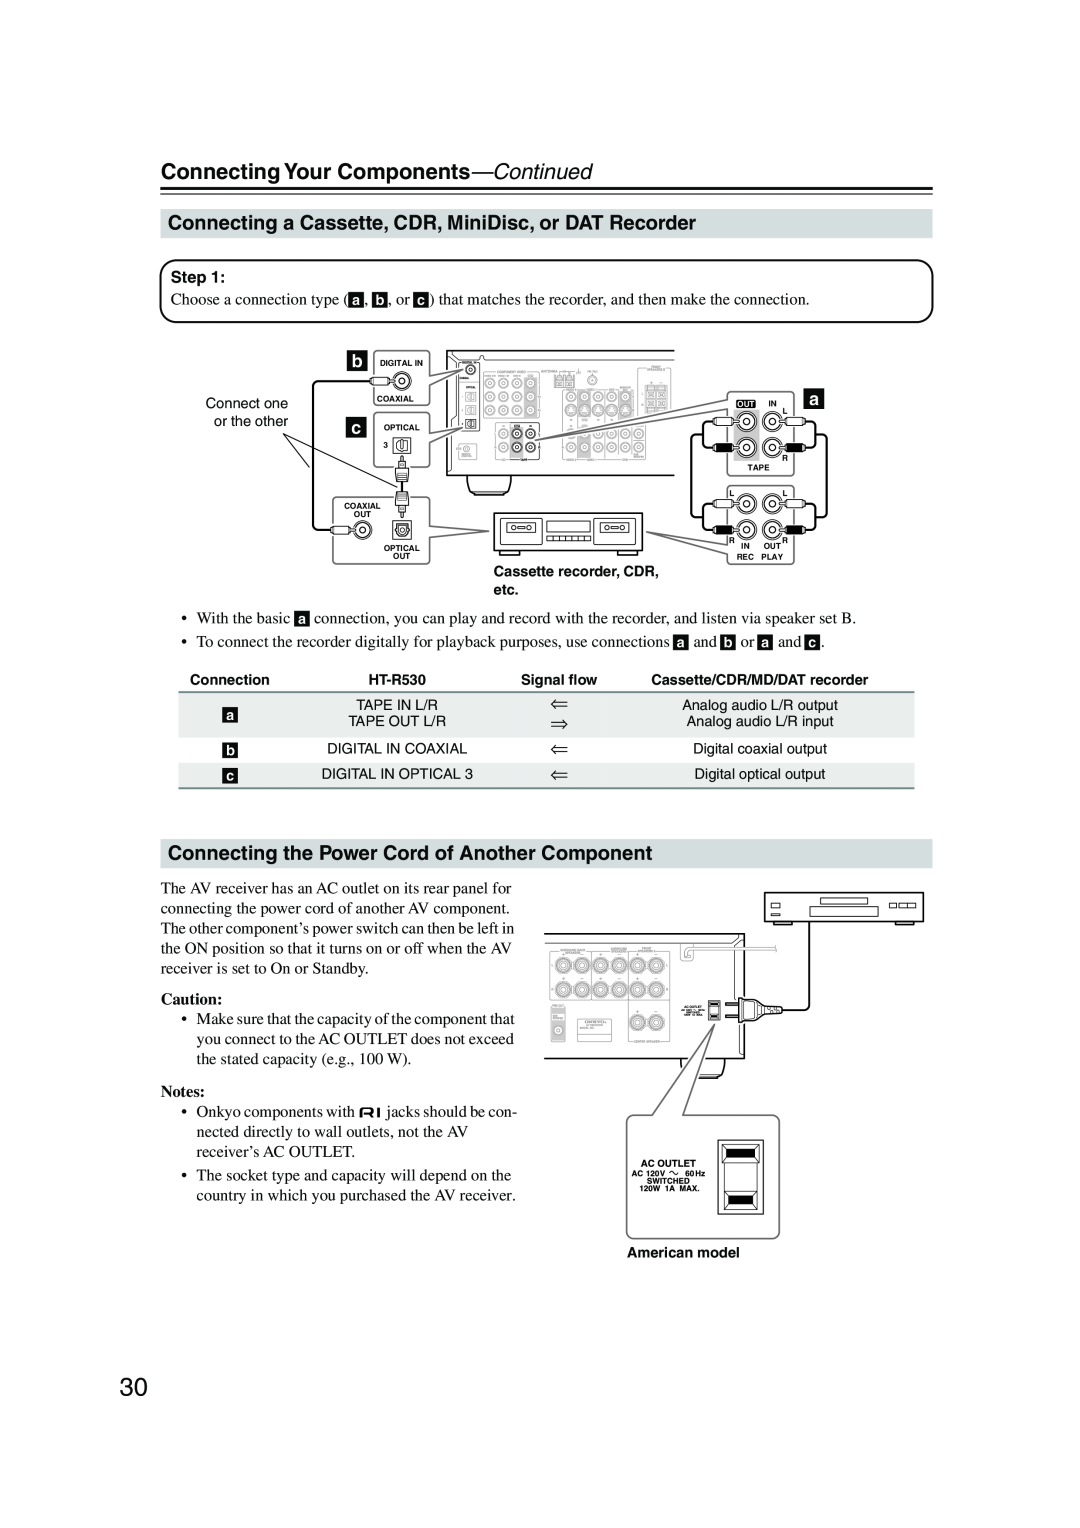 Onkyo HT-S780 instruction manual Connecting the Power Cord of Another Component, Connecting Your Components—Continued 